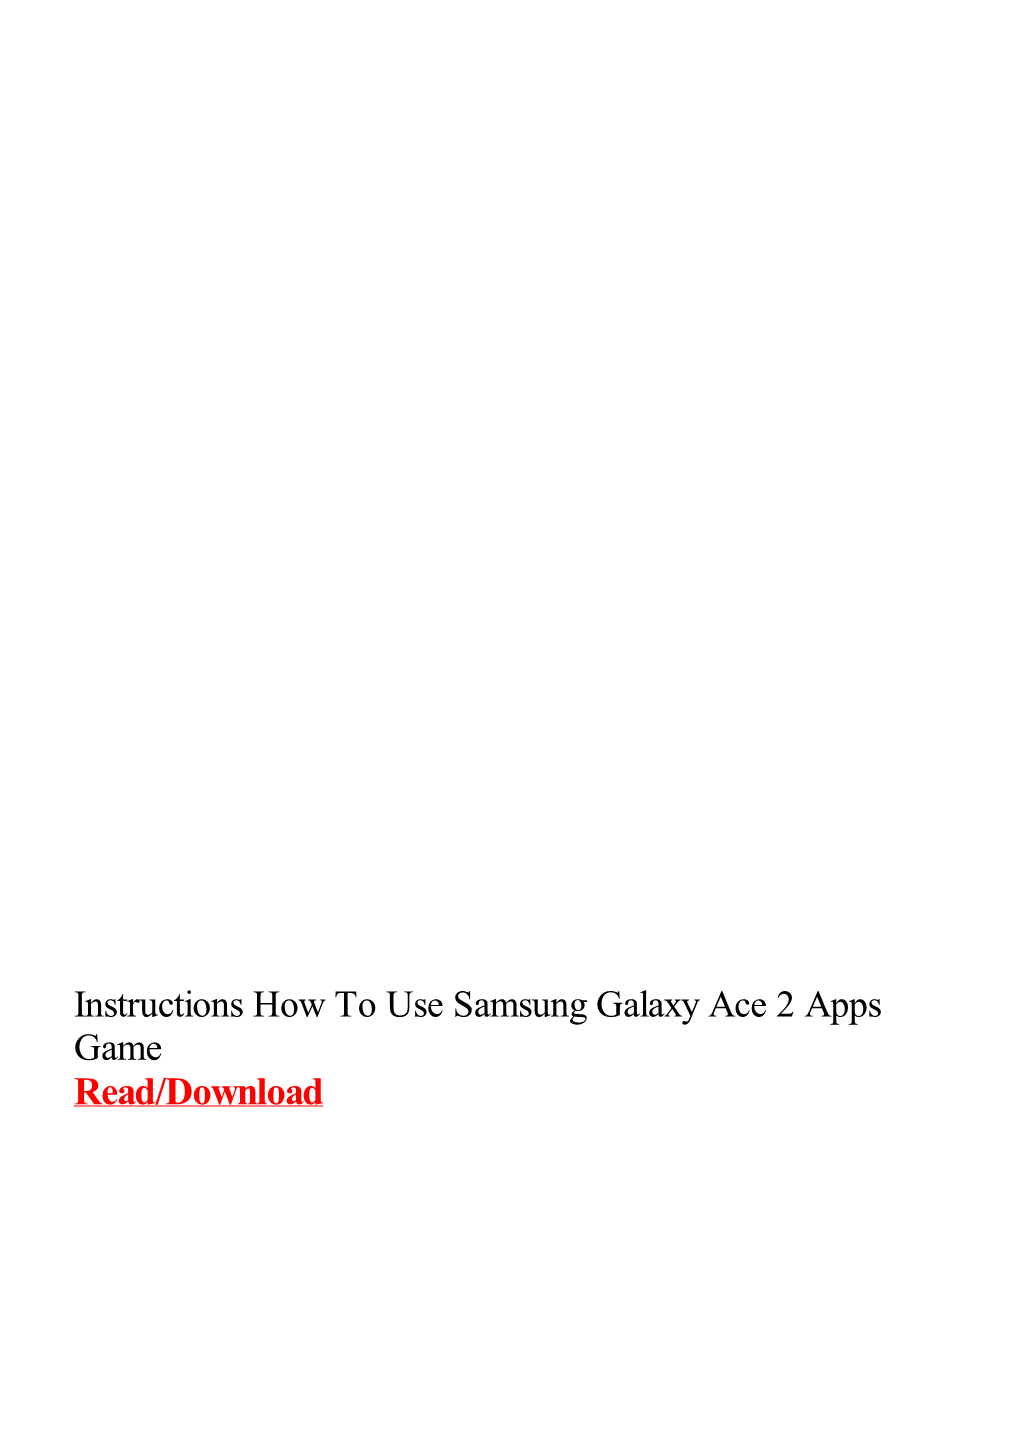 Instructions How to Use Samsung Galaxy Ace 2 Apps Game